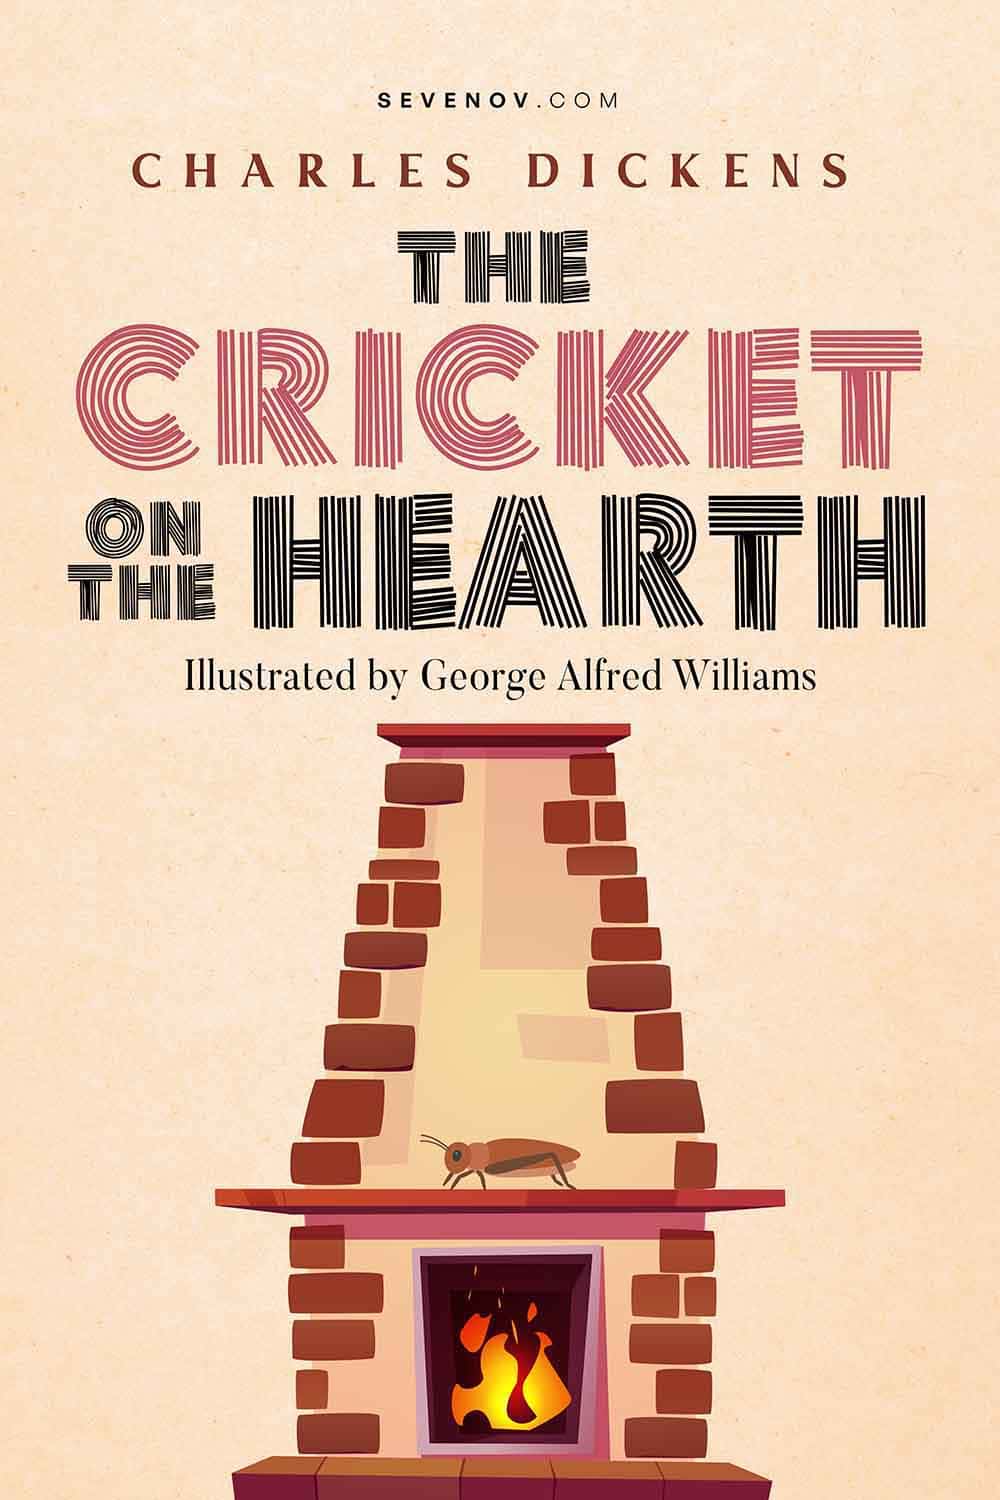 https://pagevio.com/wp-content/uploads/2023/01/the-cricket-on-the-hearth-george-alfred-williams-20230104.jpg